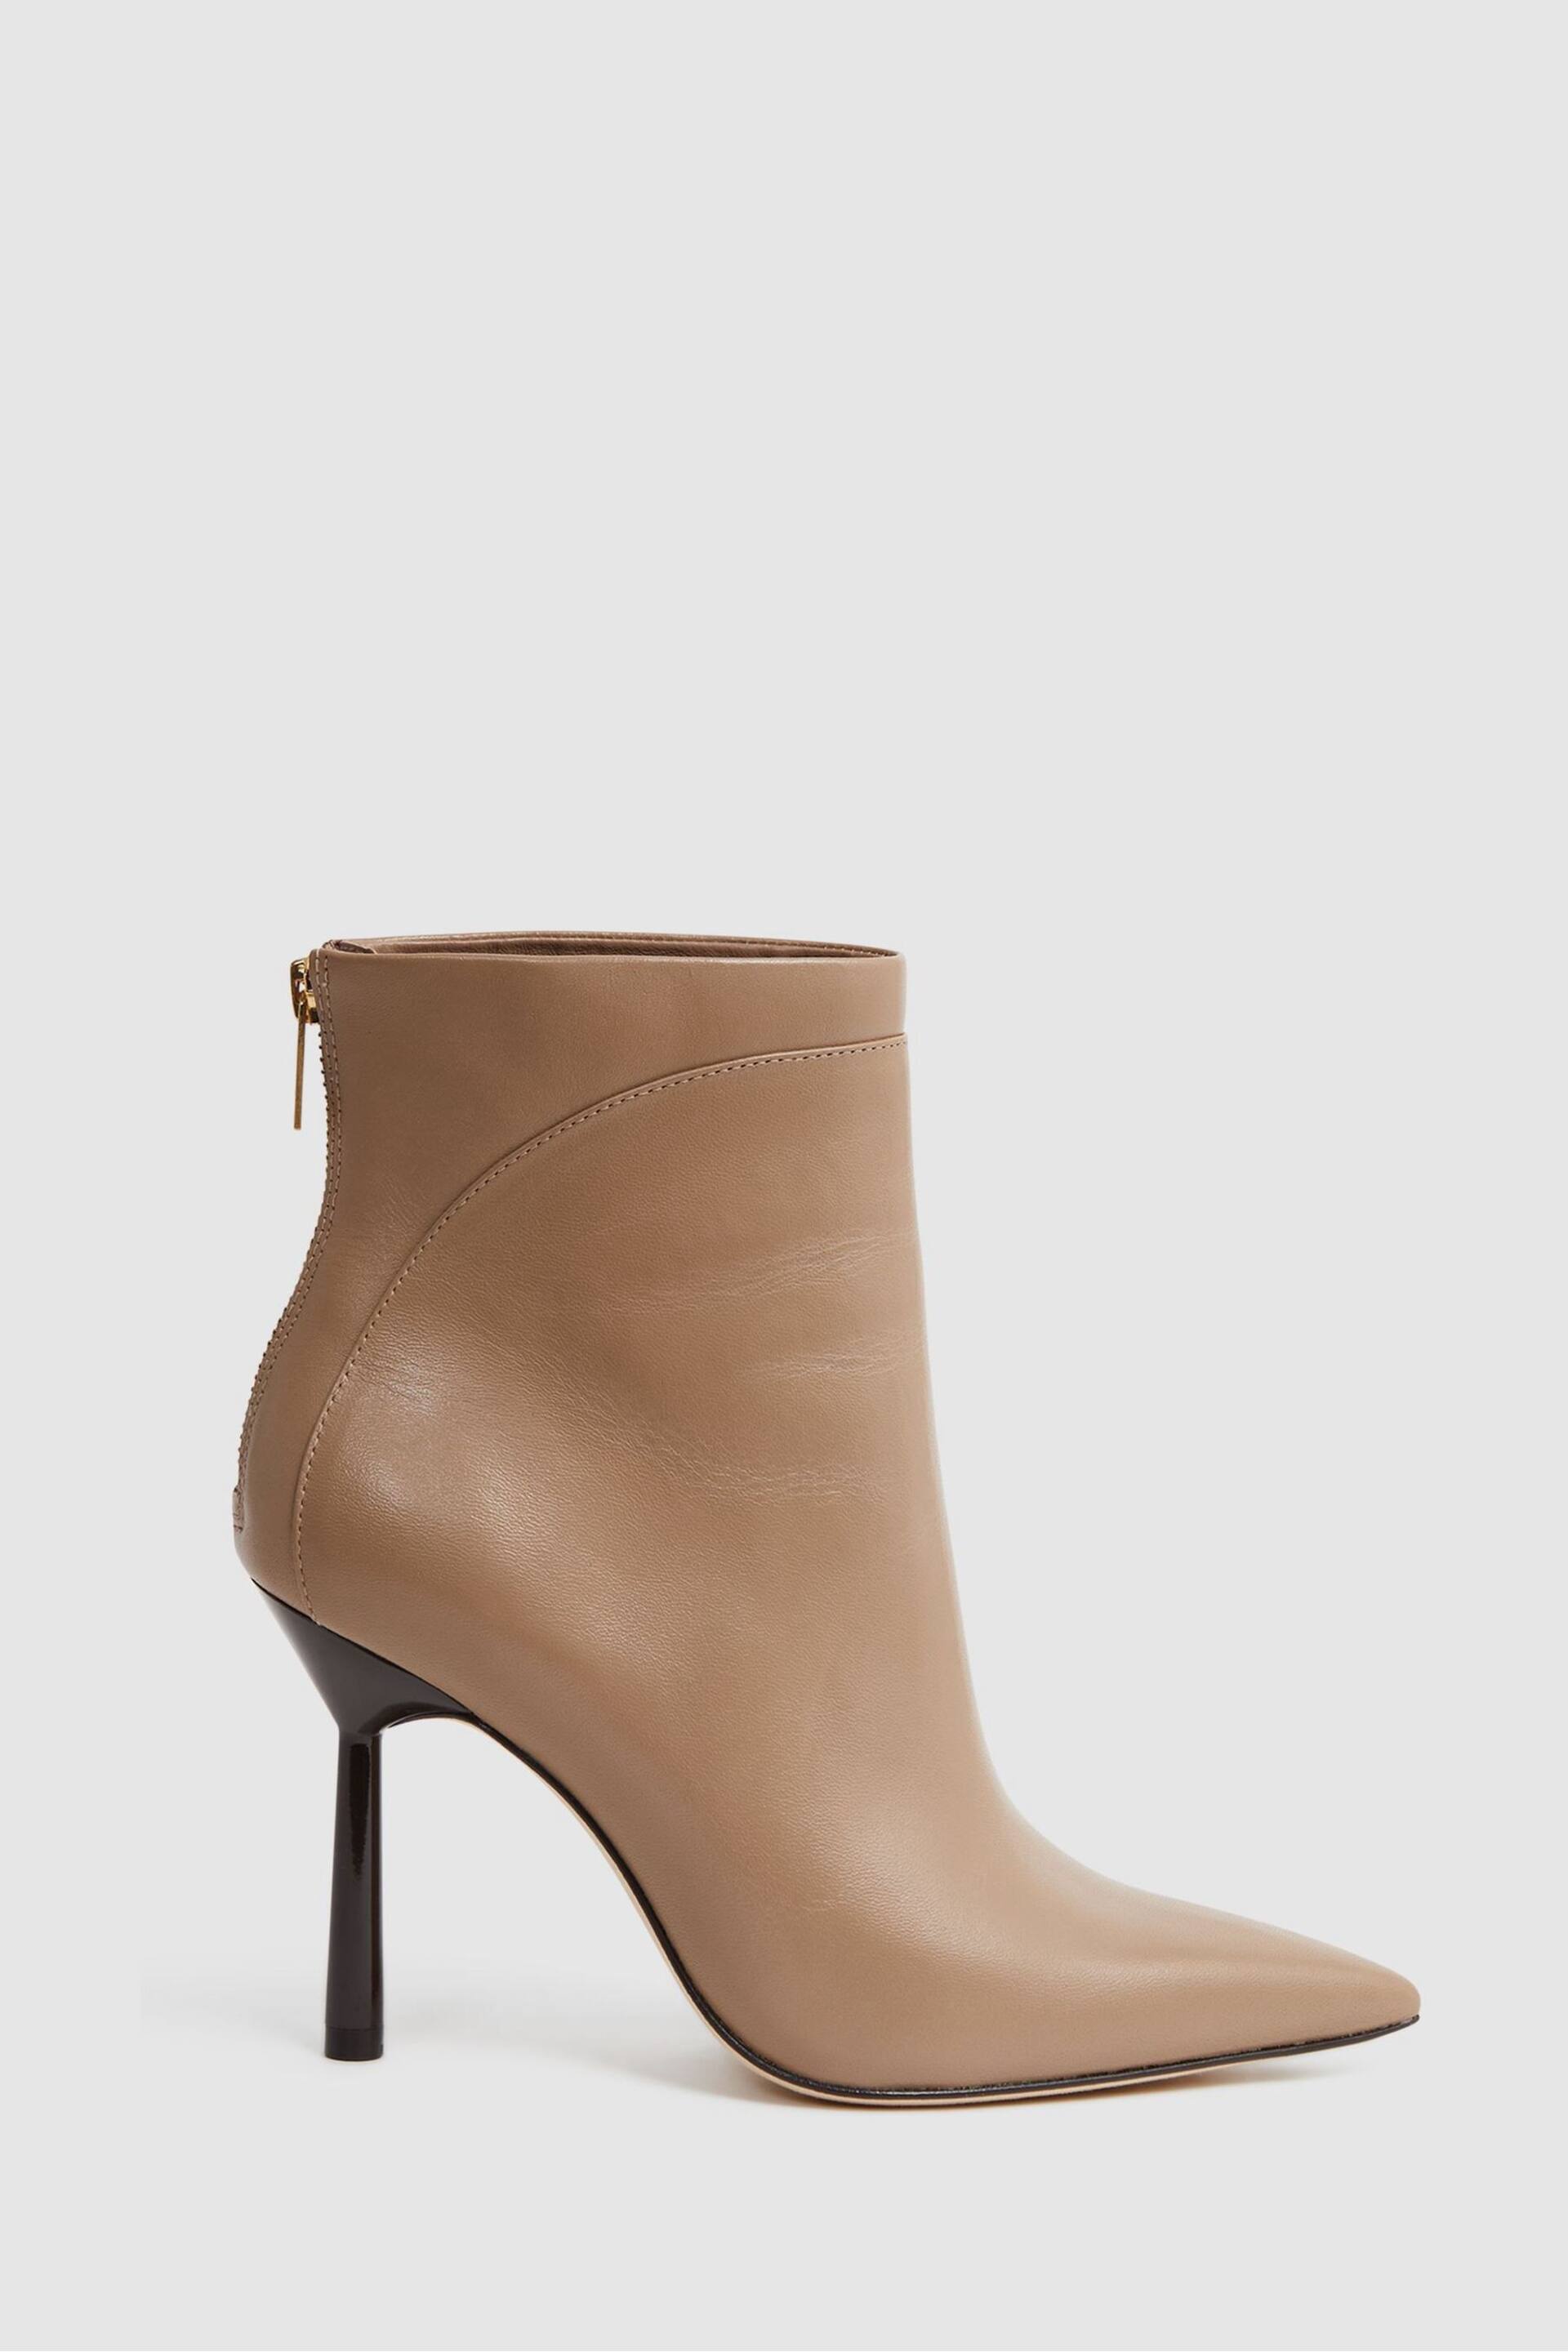 Reiss Camel Lyra Signature Leather Ankle Boots - Image 1 of 5